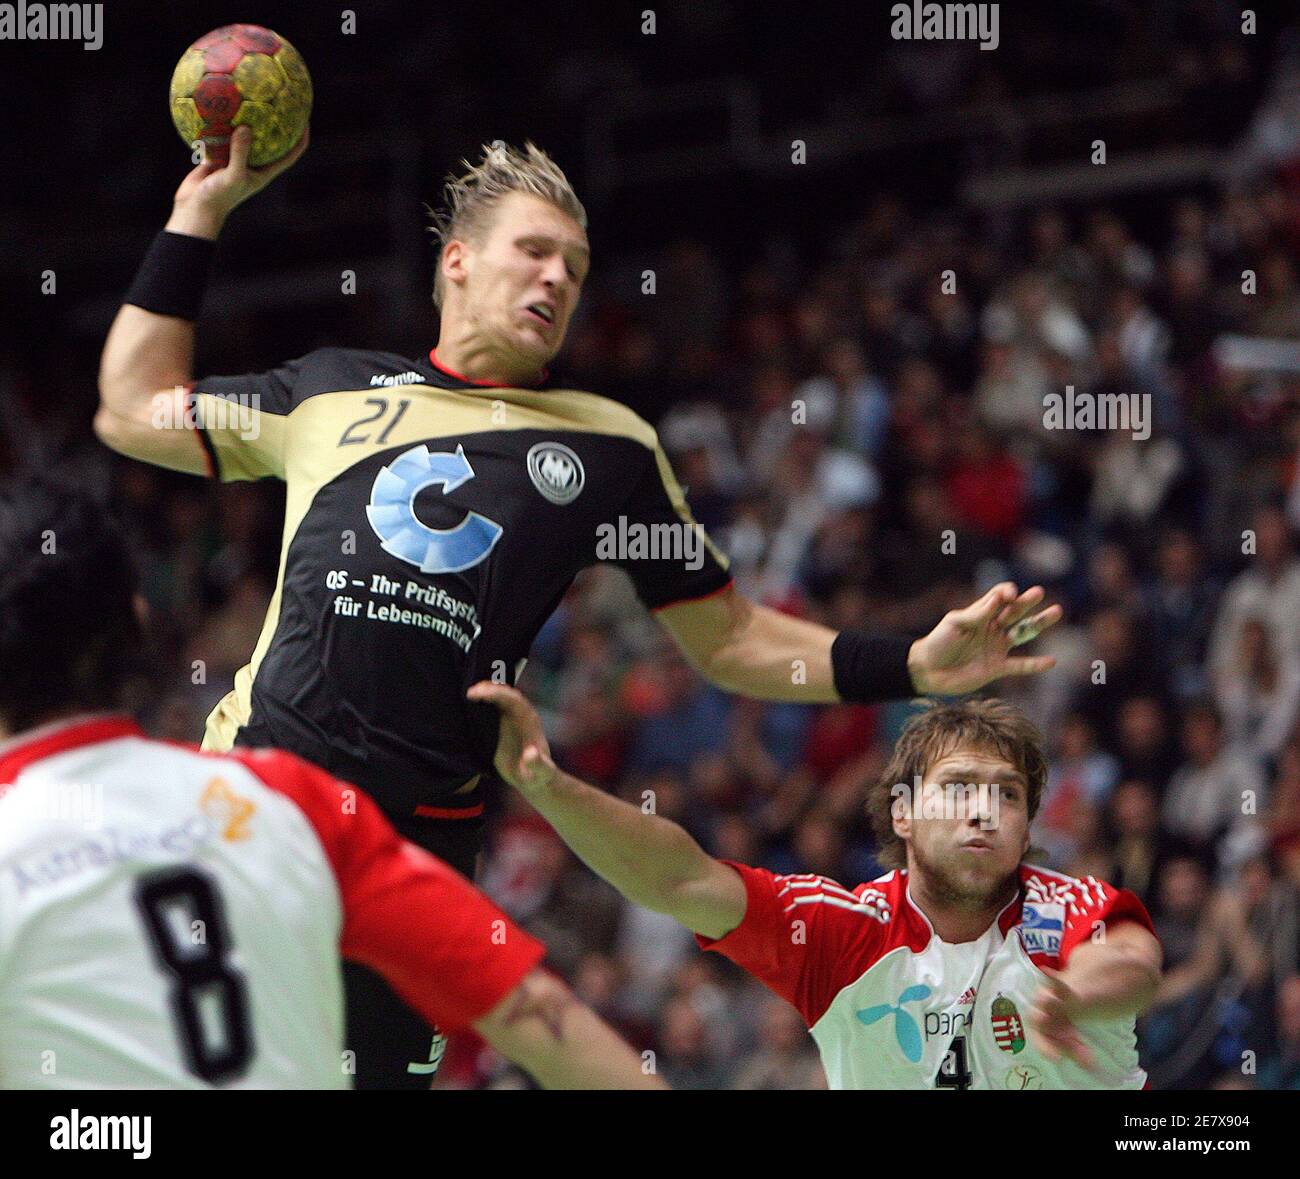 Gabor of Hungary challenges Lars Kaufmann of Germany during their friendly handball match in Budapest January 7, 2007. REUTERS/Laszlo Balogh (HUNGARY Stock Photo - Alamy